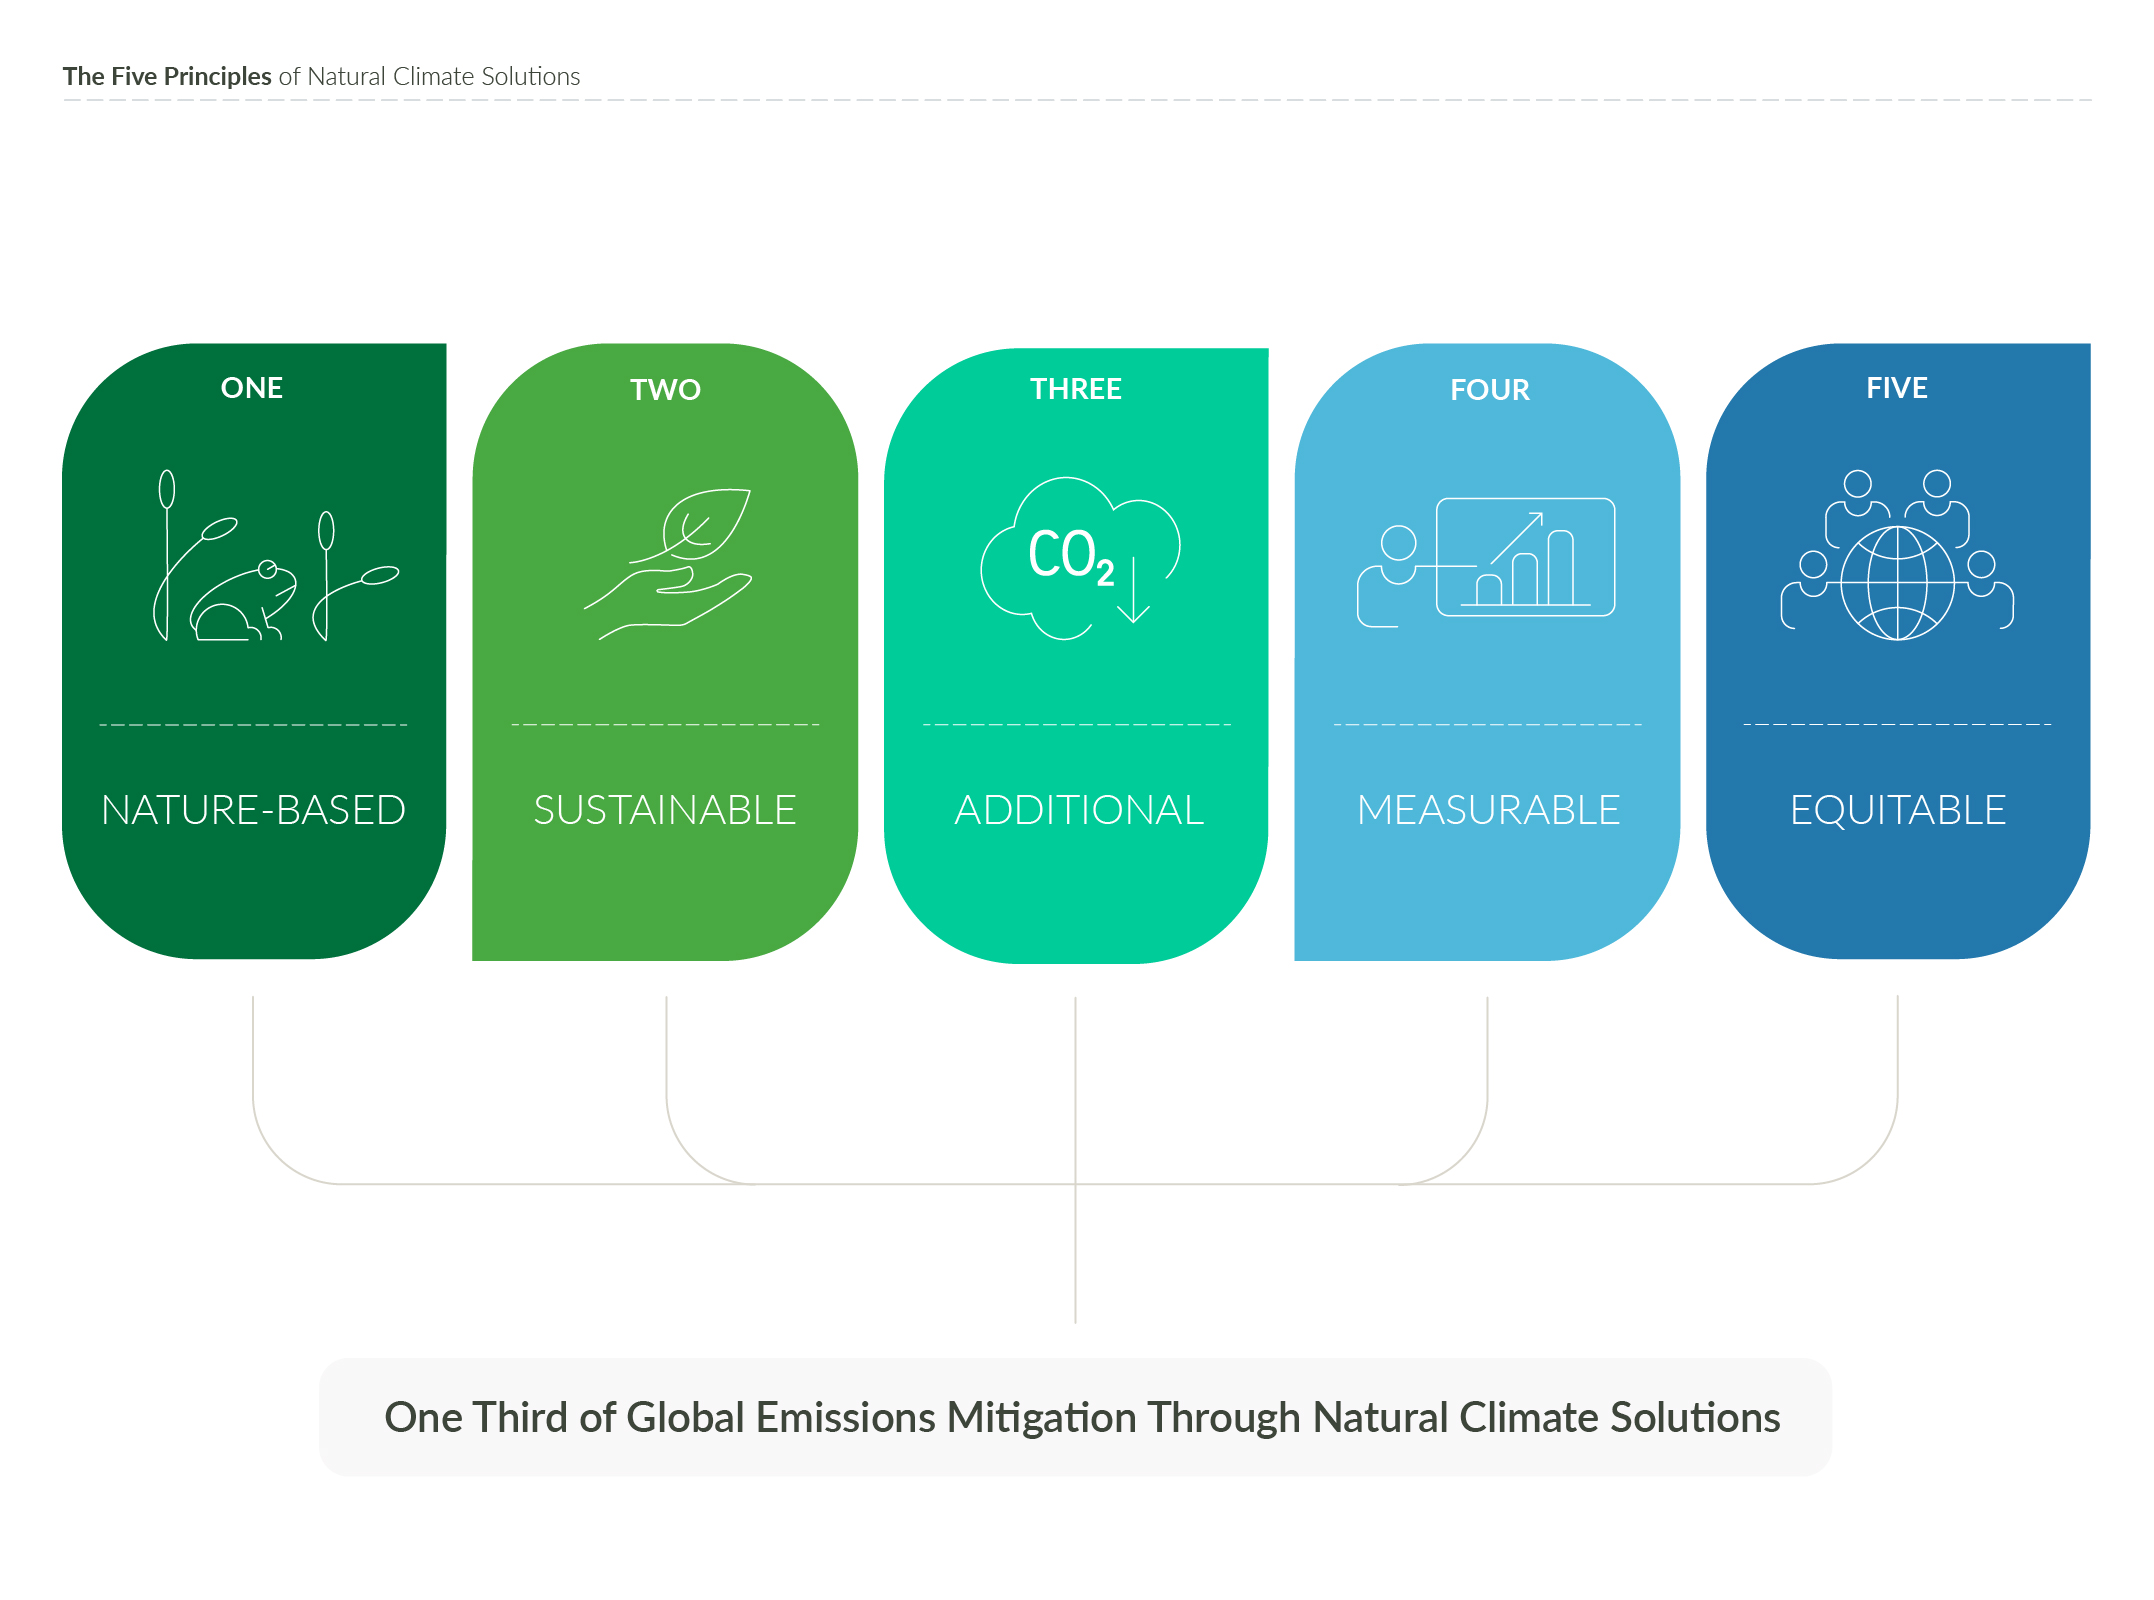 Principles of Natural Climate Solutions